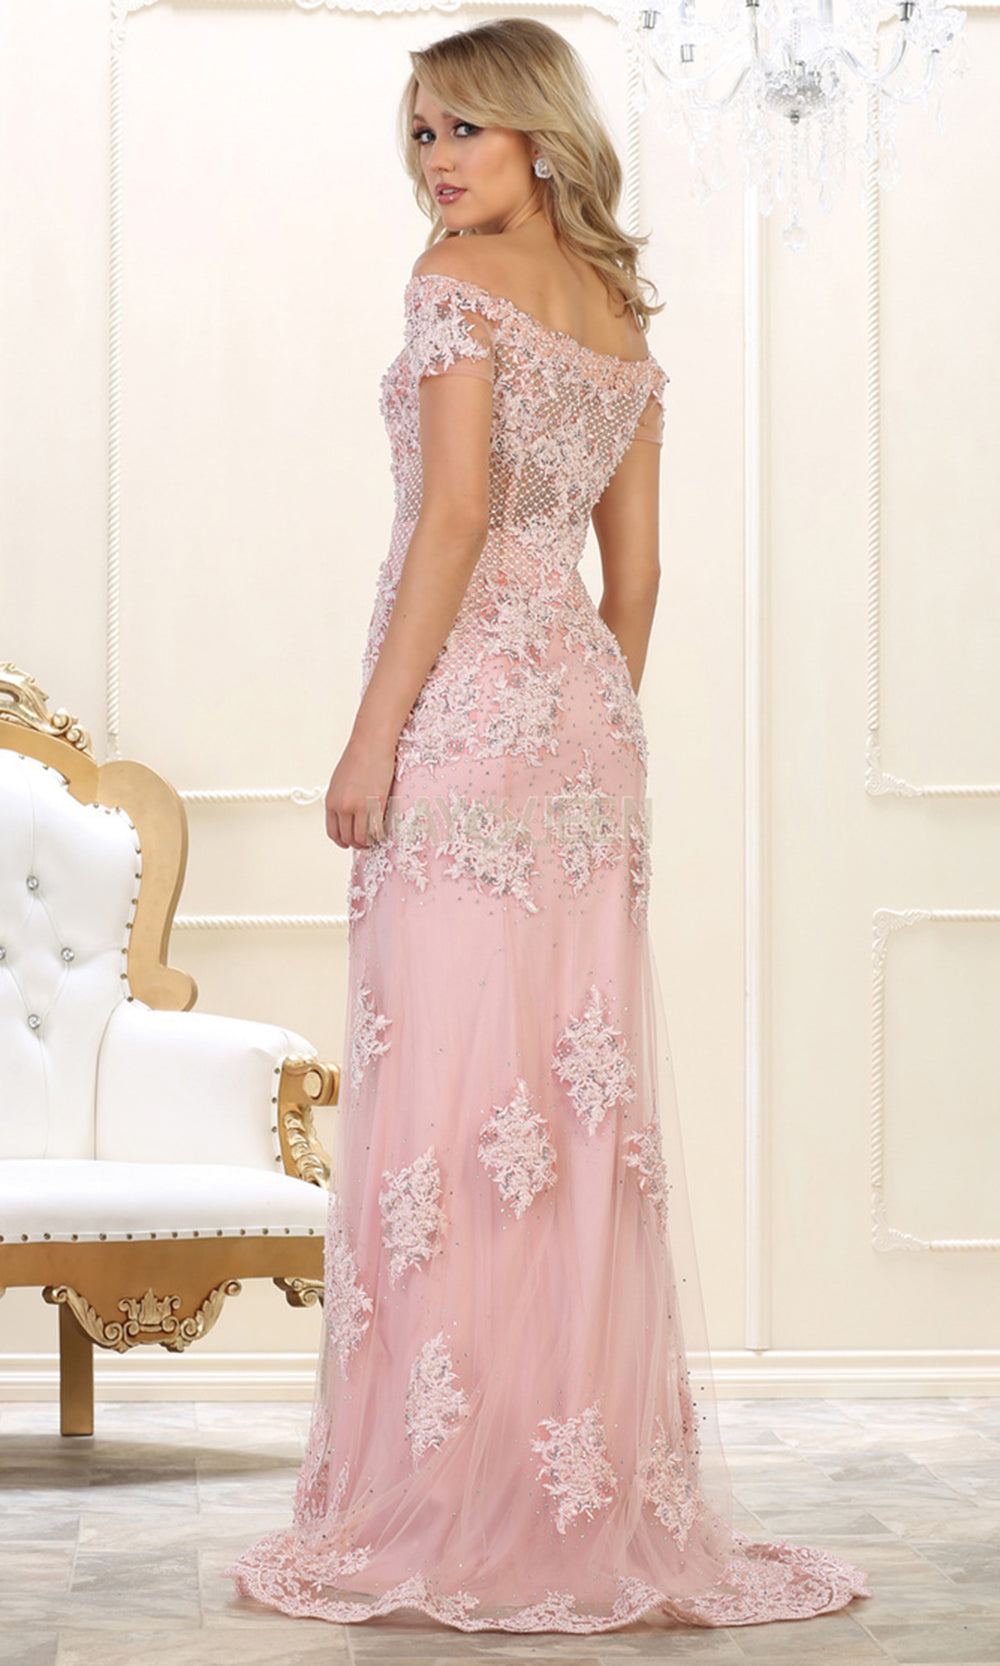 May Queen RQ7621 Pink